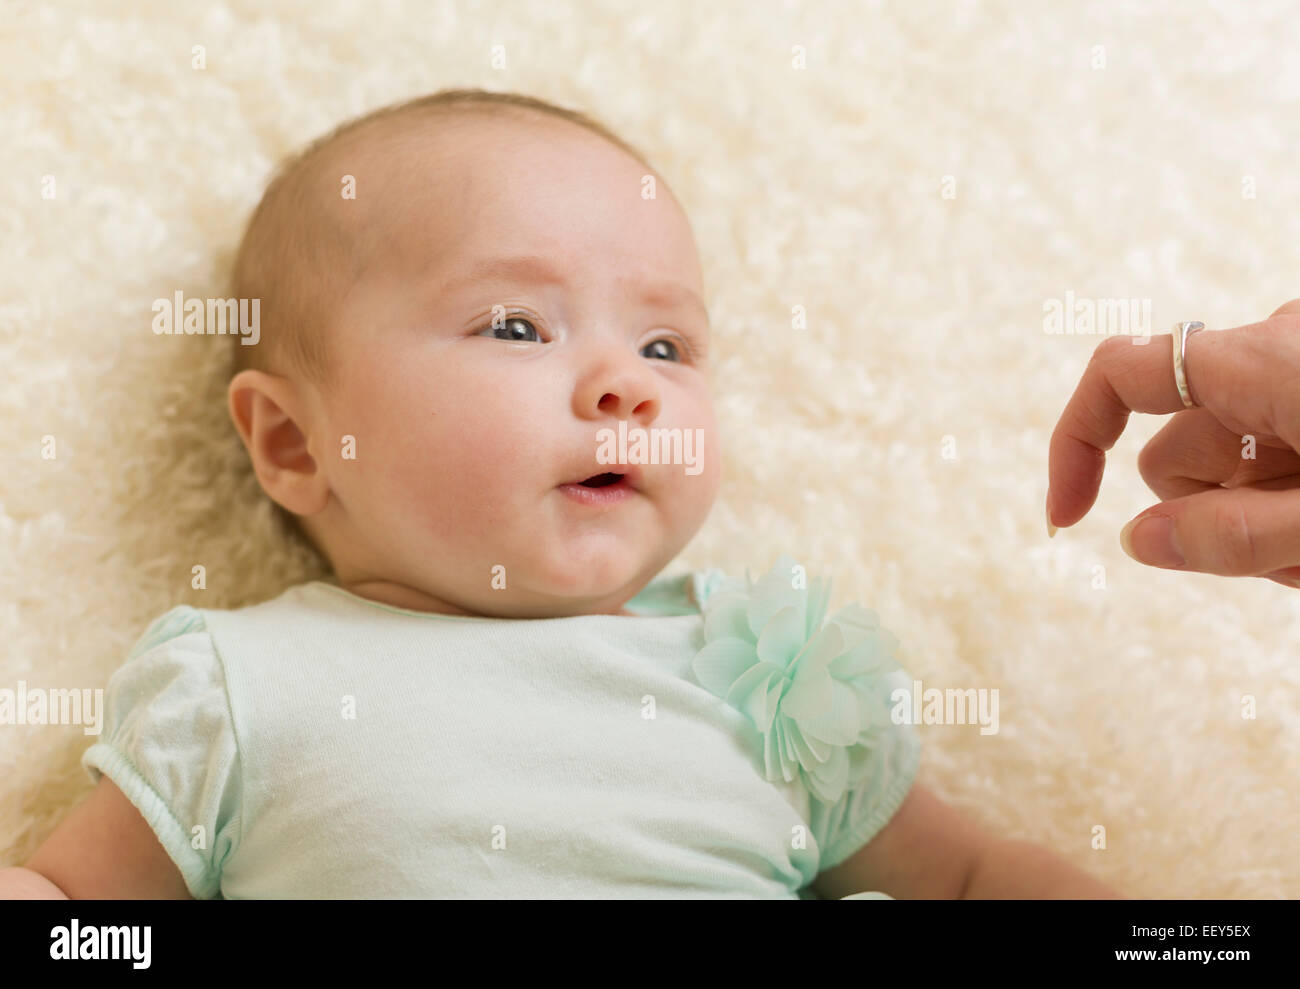 Three month old baby girl staring intently at finger and hand of its mother Stock Photo